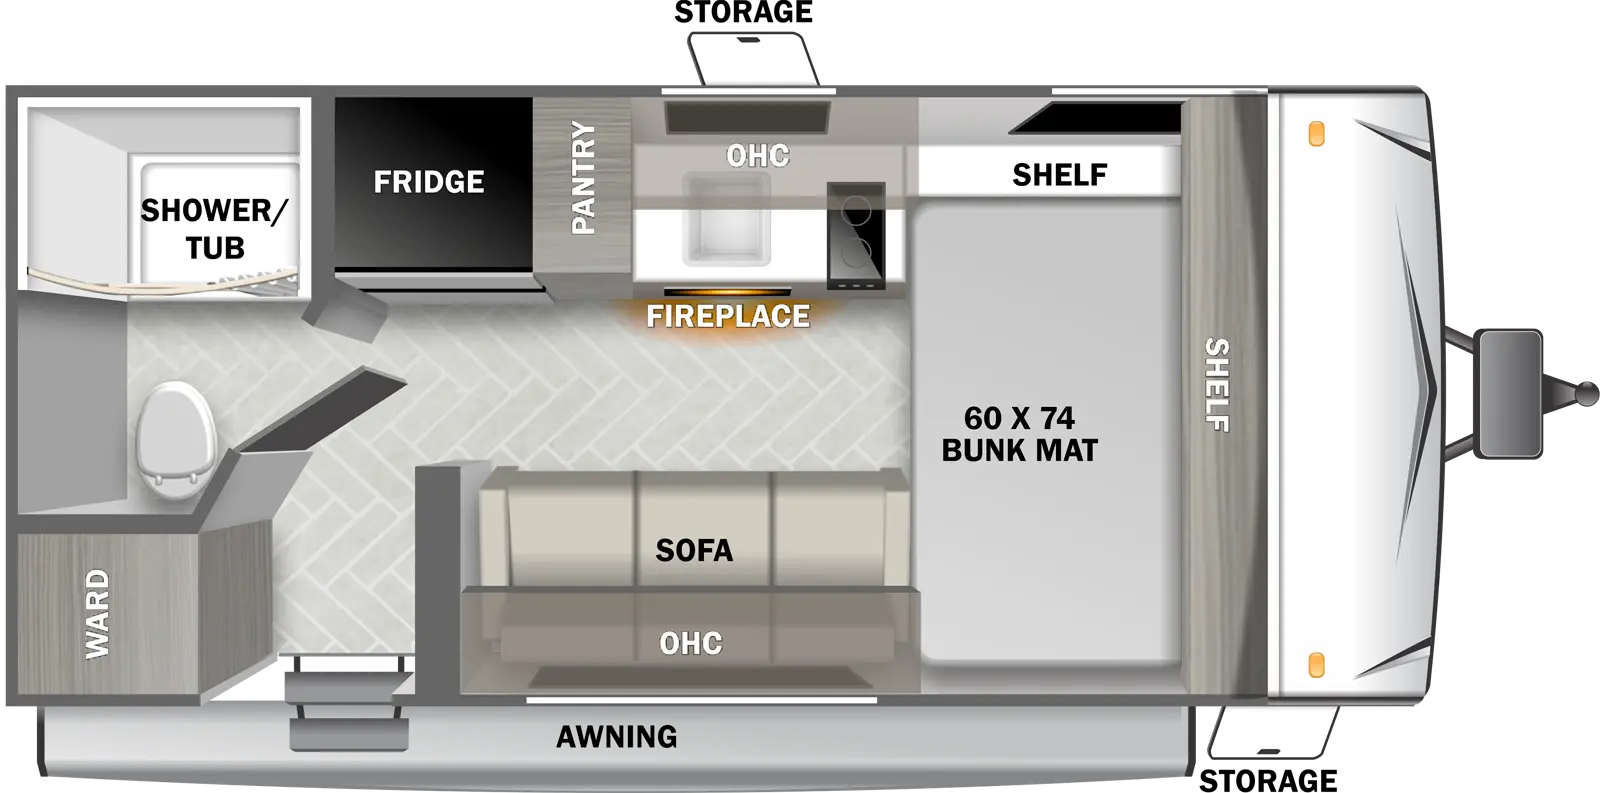 The 157FBGT has zero slideouts and one entry. Exterior features an awning and storage. Interior layout front to back: side-facing bunk mat with shelf along front wall and off-door side; door side sofa and overhead cabinet, and entry door; off-door side kitchen counter with cooktop, sink, overhead cabinet, pantry and refrigerator; rear wardrobe, and bathroom with toilet and shower/tub only.